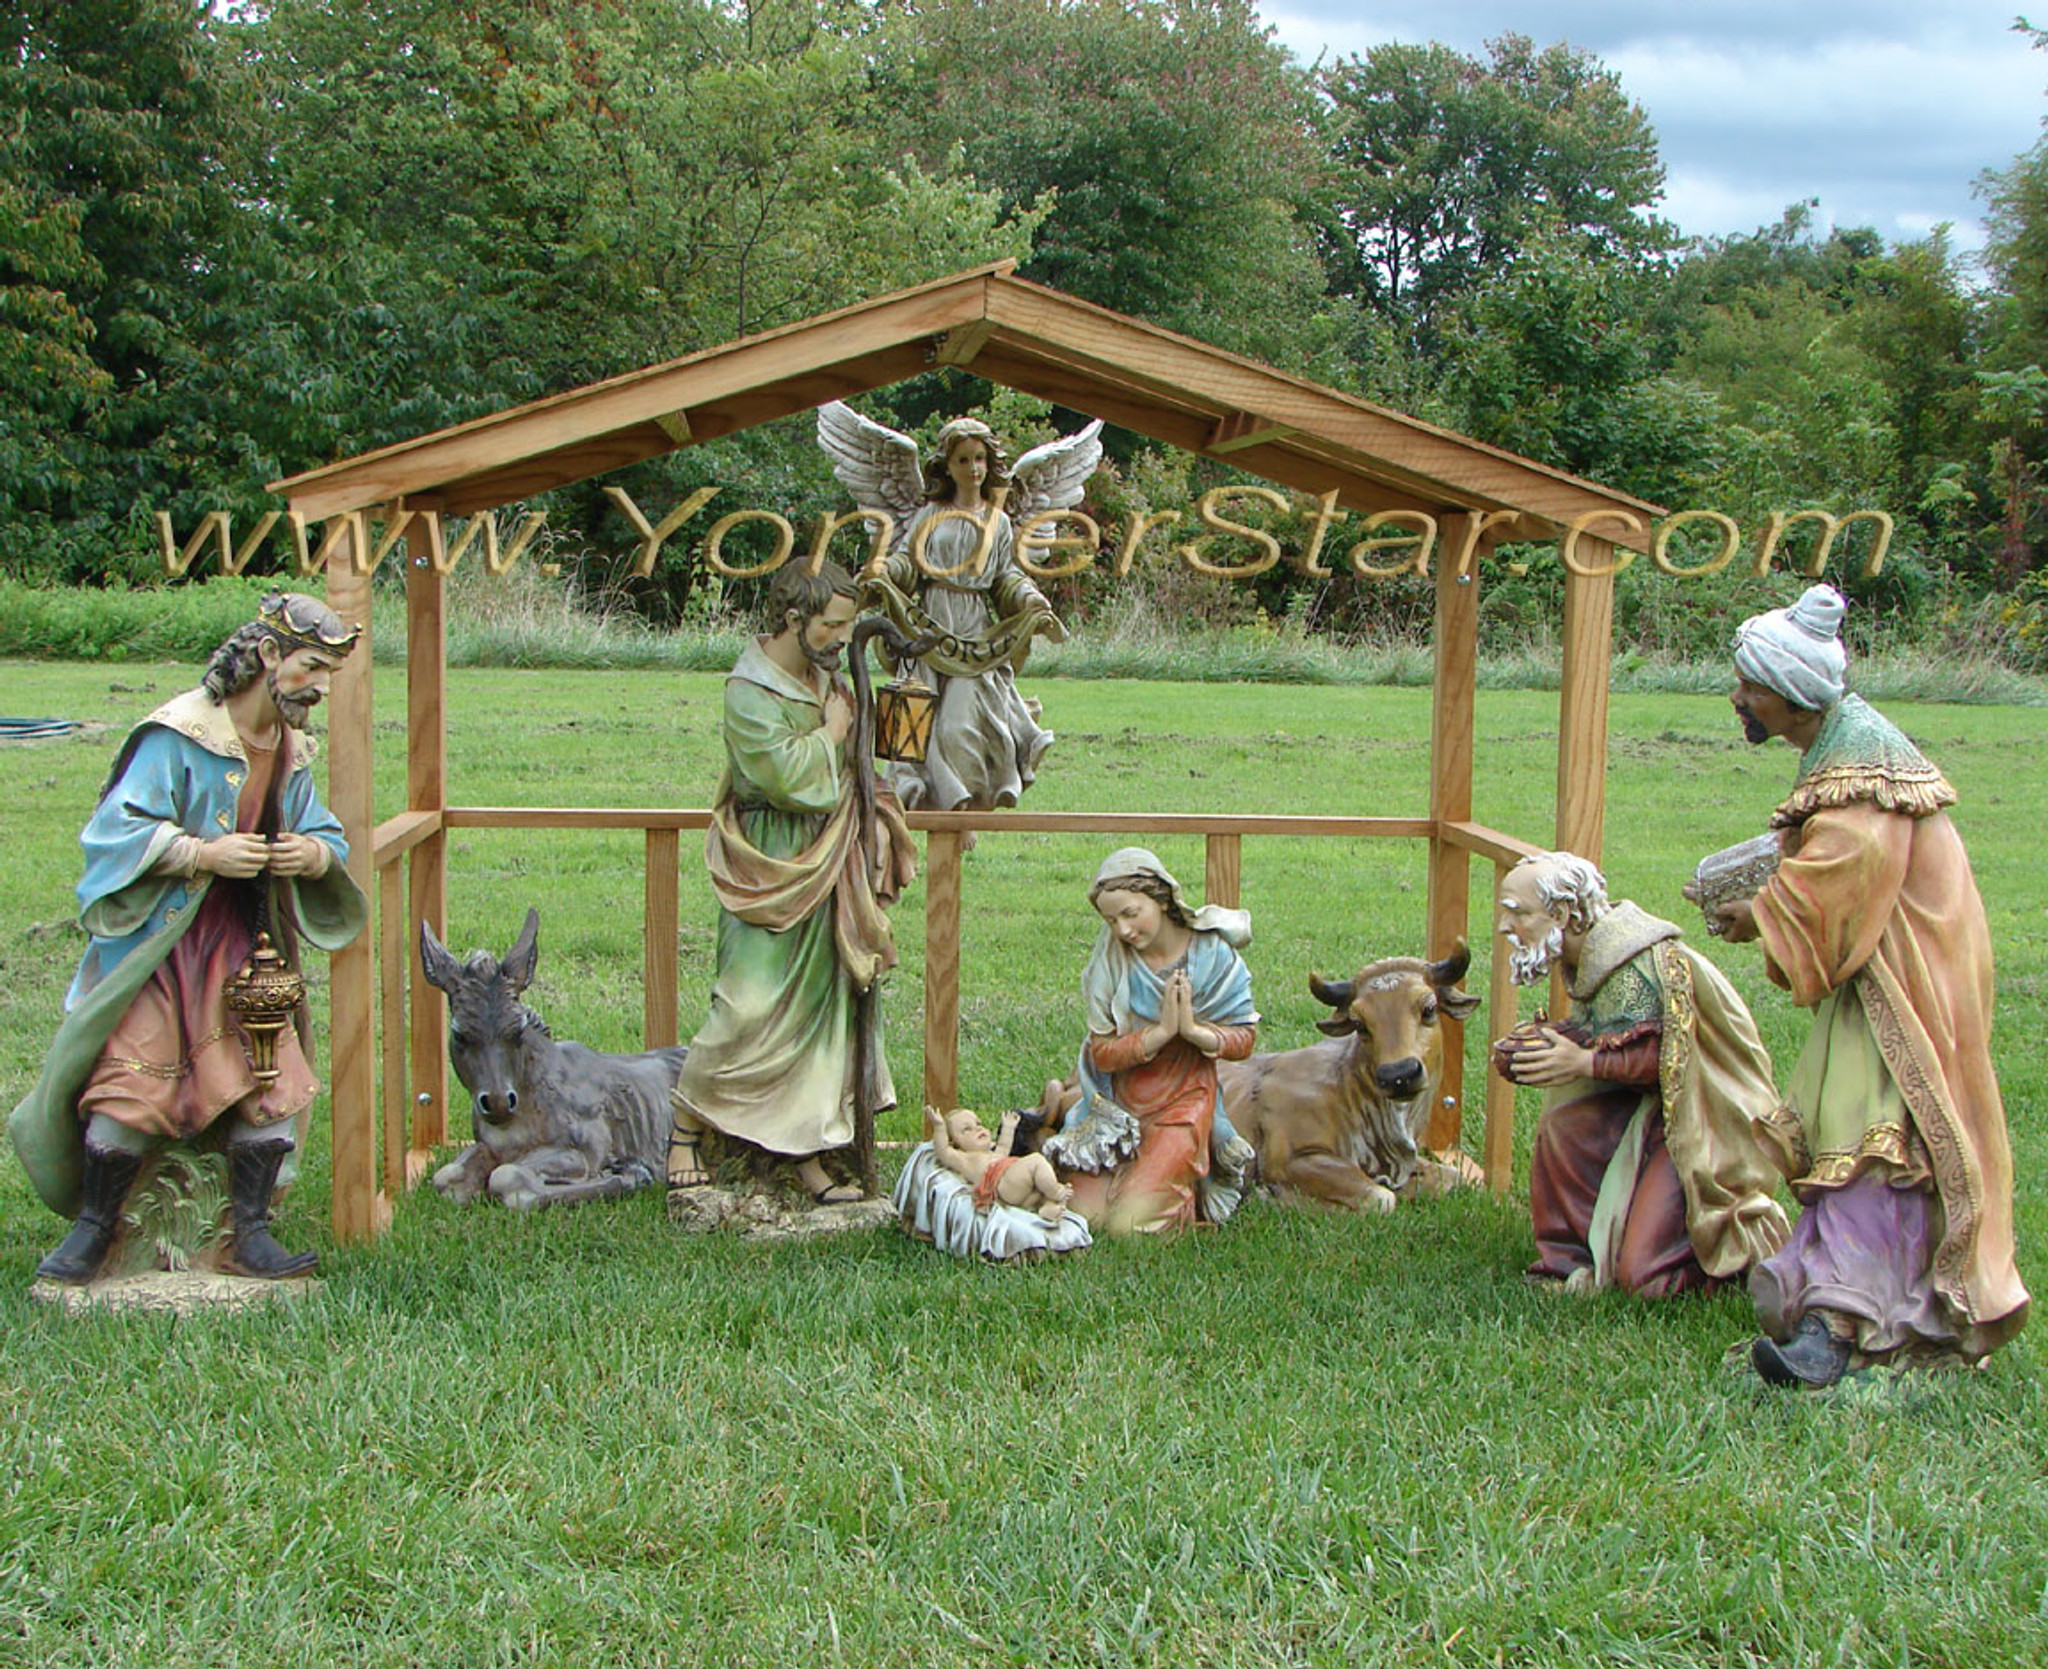 Outdoor Nativity Scene with Wooden Stable Yonder Star Christmas Shop LLC